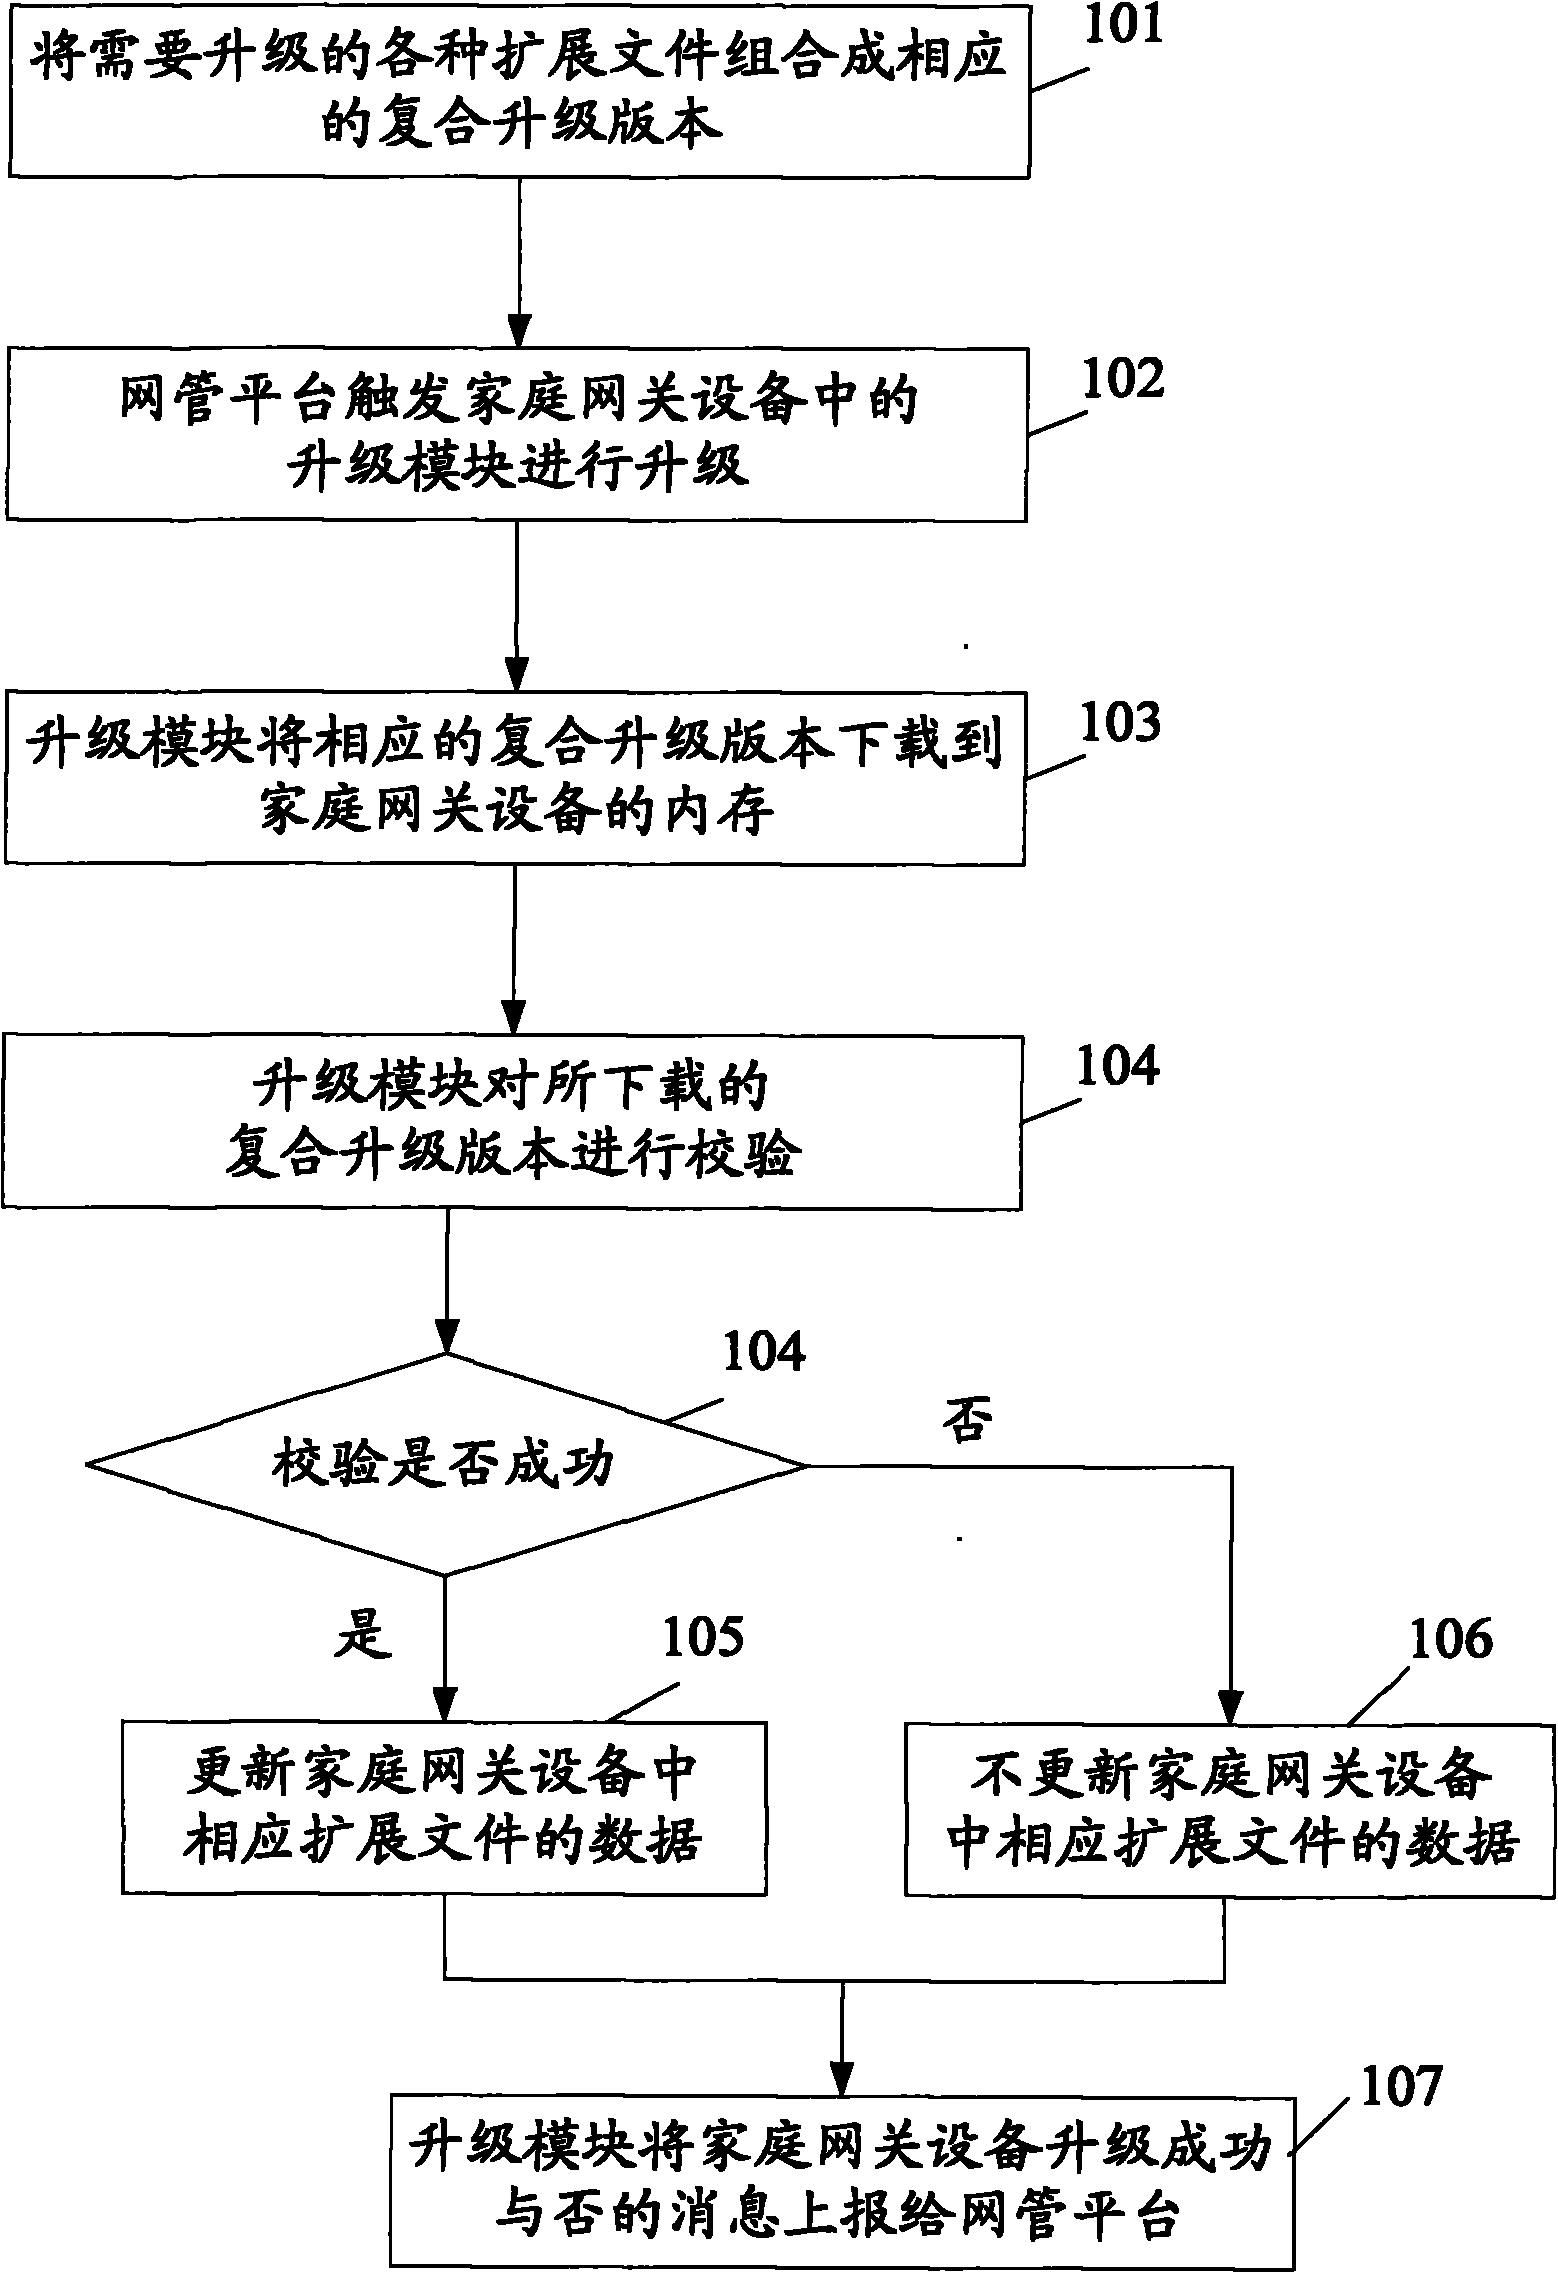 Method and system for upgrading equipment